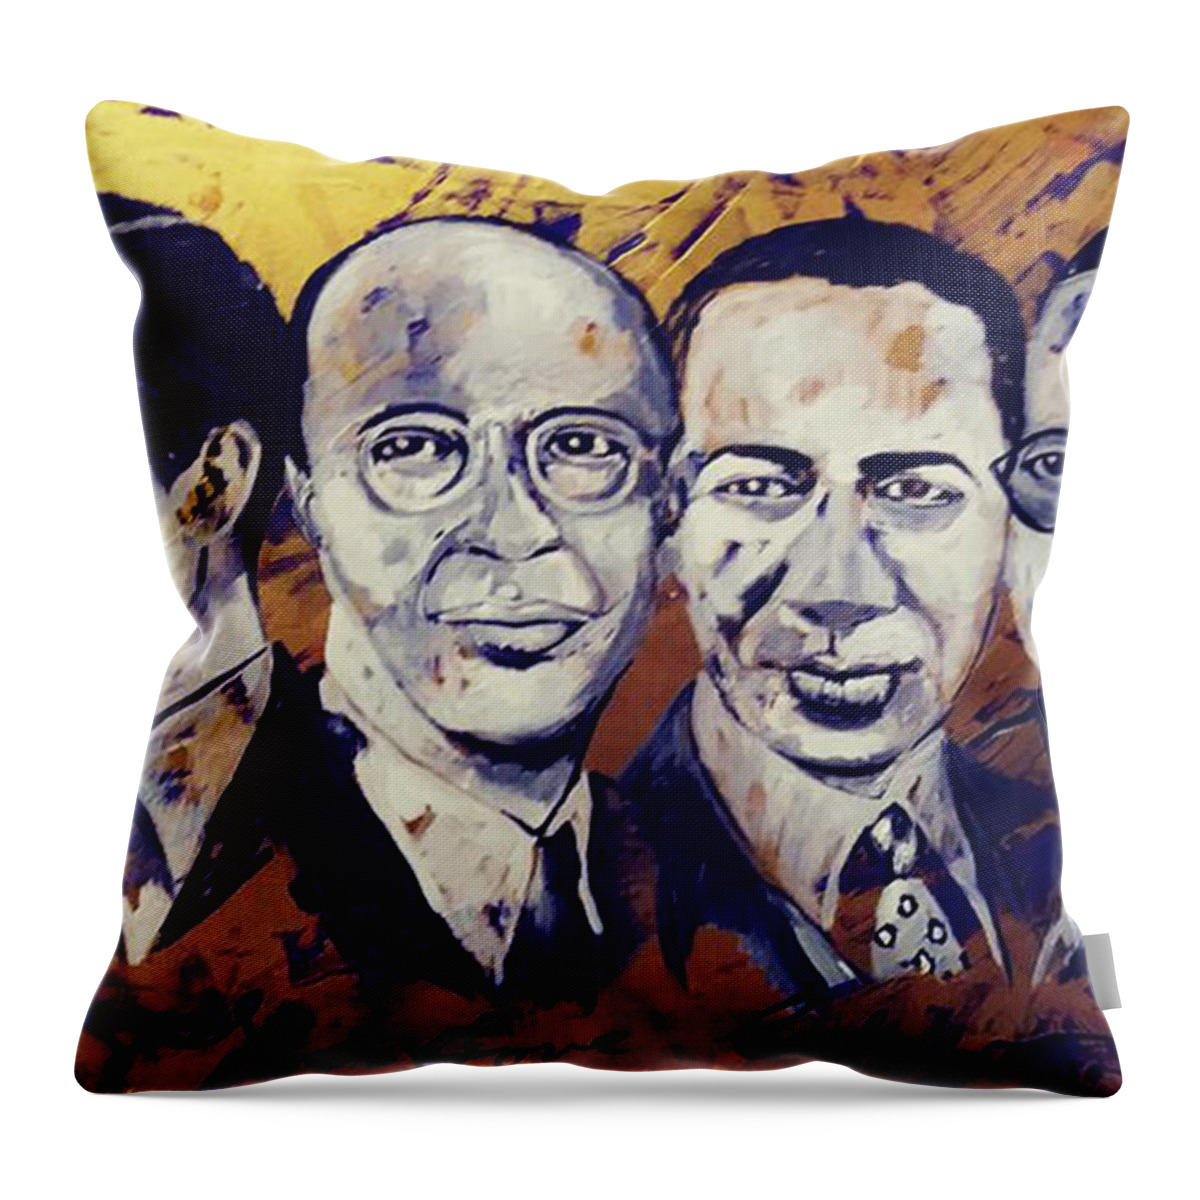 Omega Psi Phi Founders Throw Pillow featuring the painting Justlovecoopercoleman by Femme Blaicasso